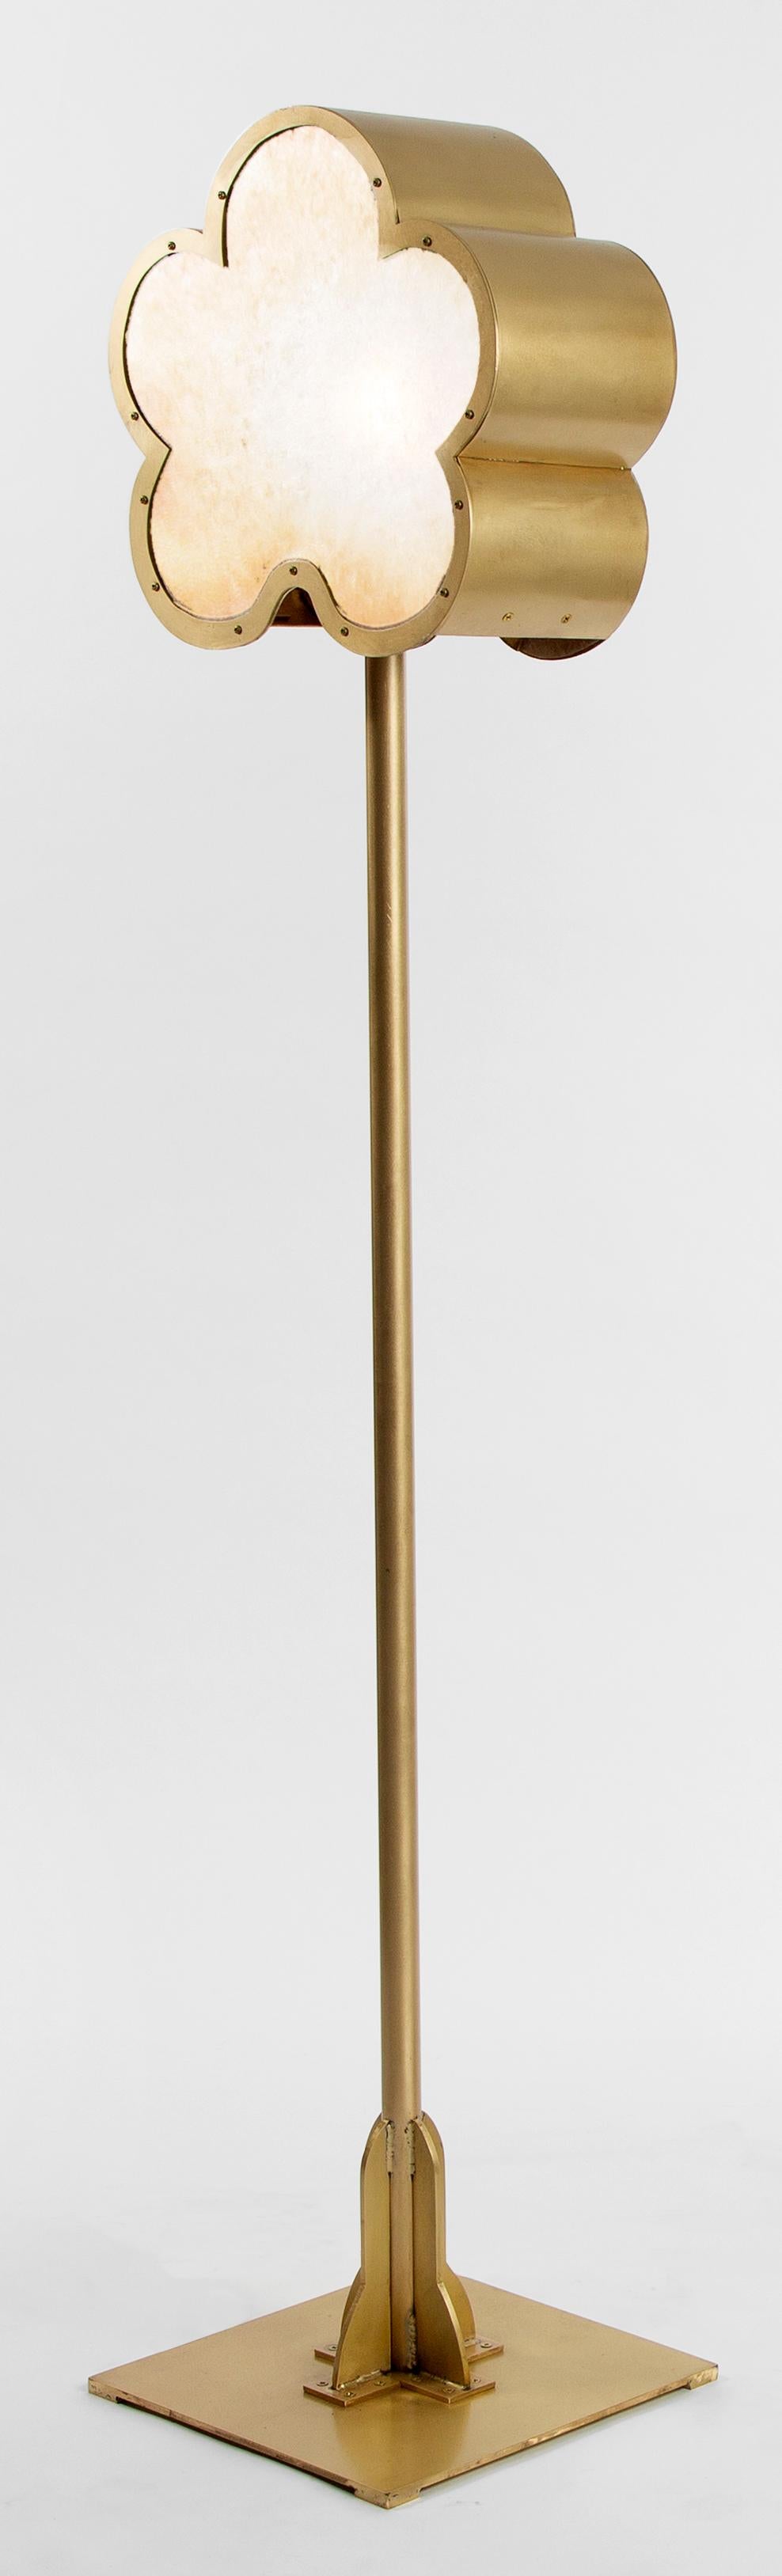 Inspired by Andy Warhol's Flowers series, this standing floor lamp is entirely handmade in bronze with square base and mica diffuser. Aluminum model also available. Requires one standard bulb (not included).